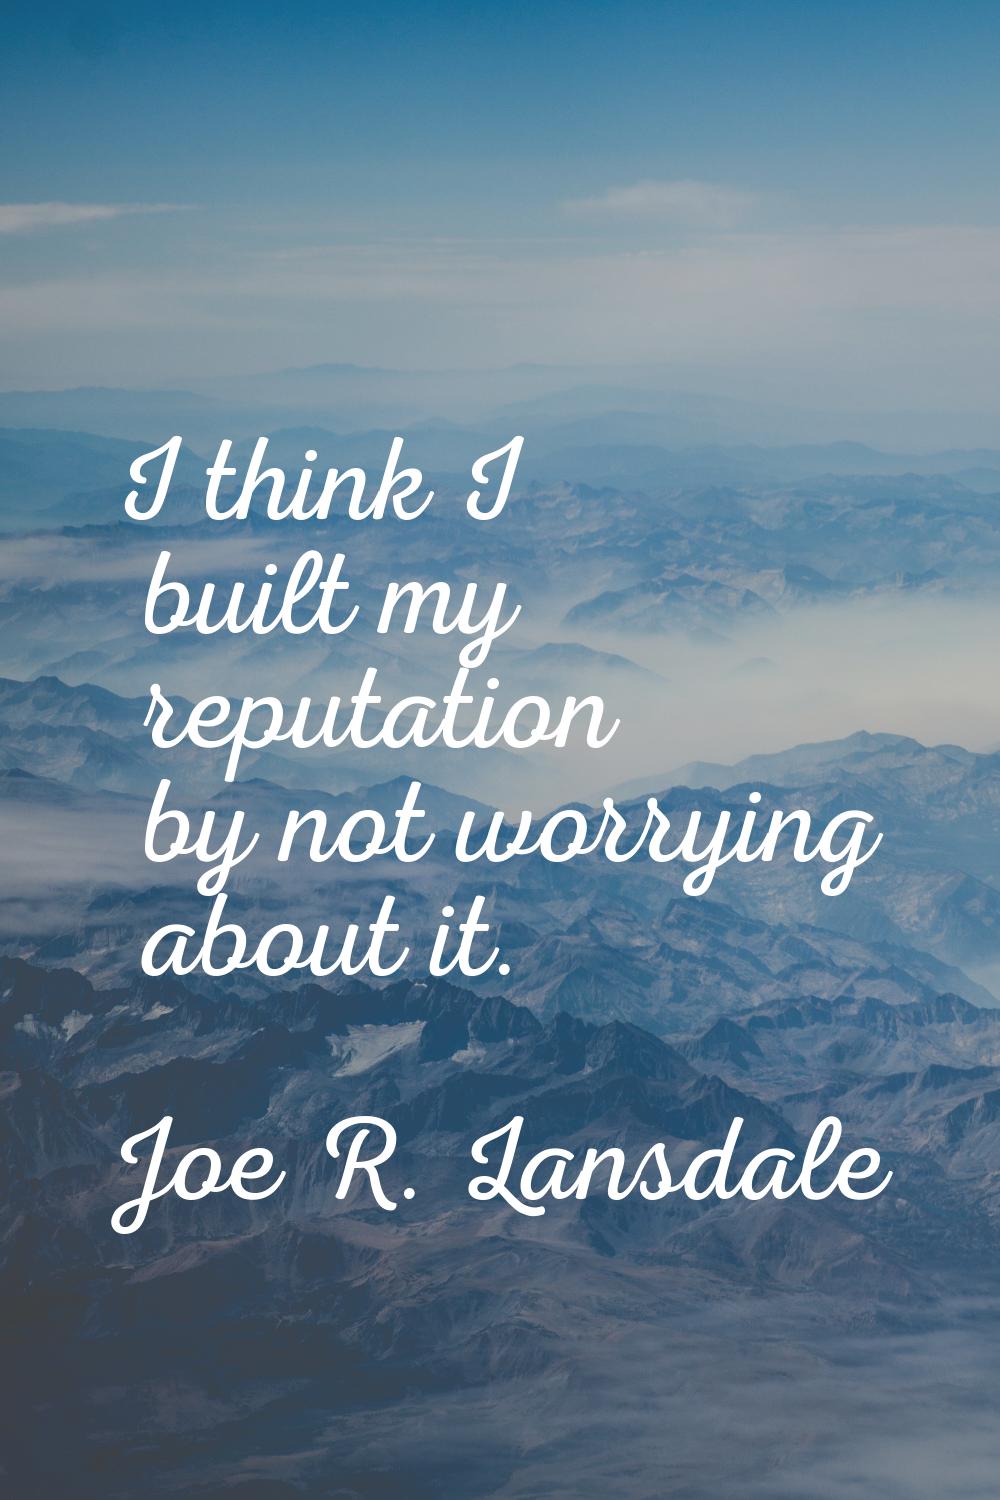 I think I built my reputation by not worrying about it.